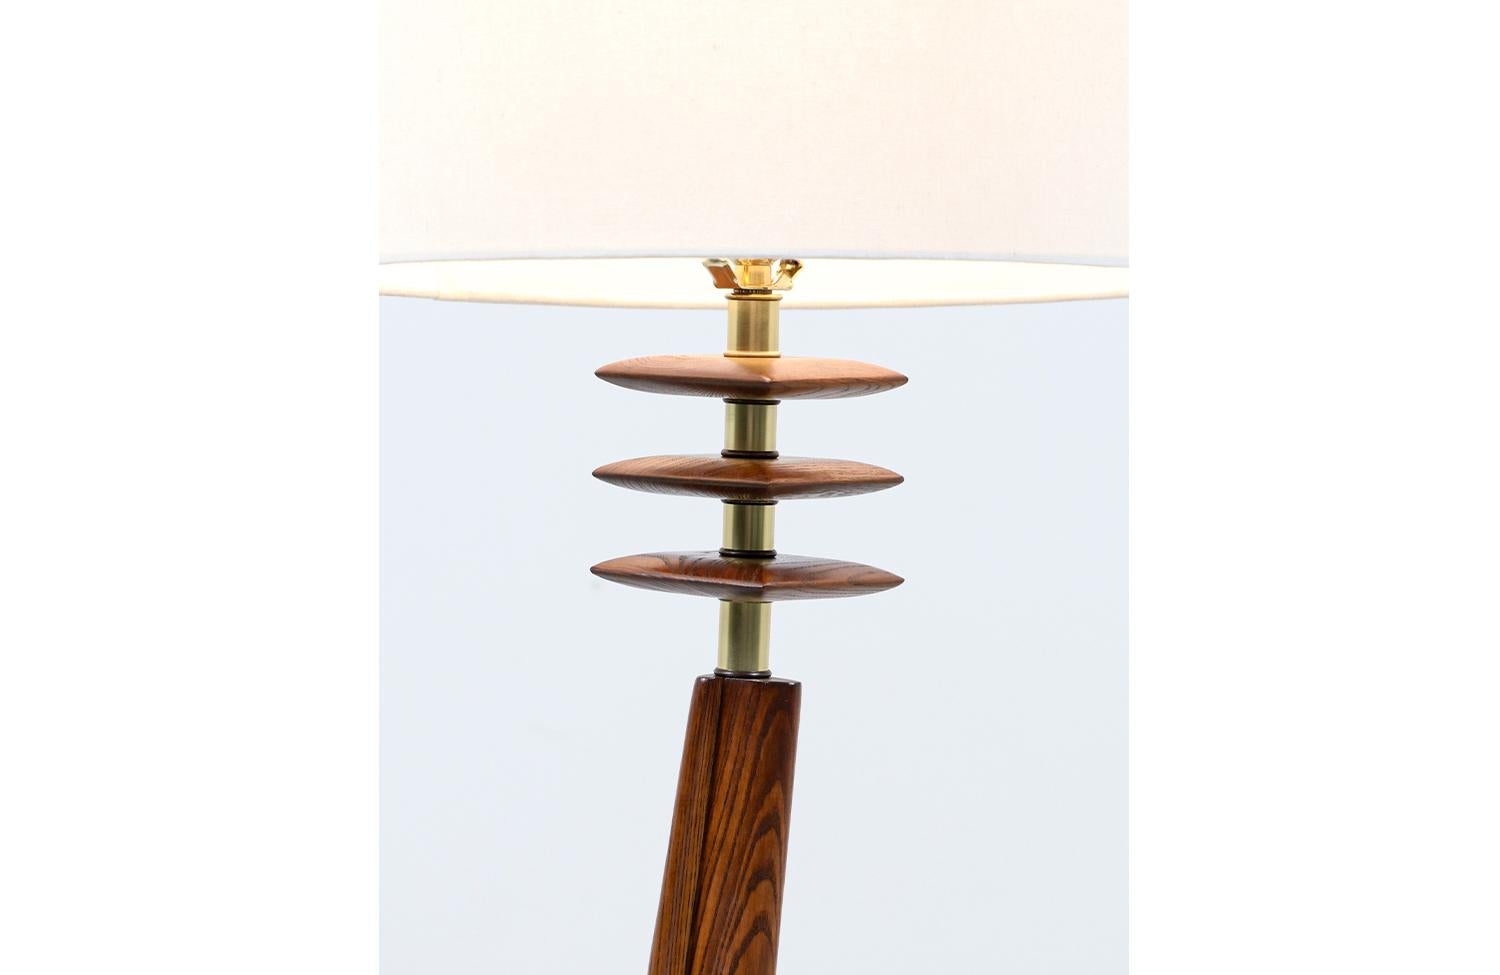  Expertly Restored - Mid-Century Modern Sculpted Floor Lamp with Brass Accents For Sale 1